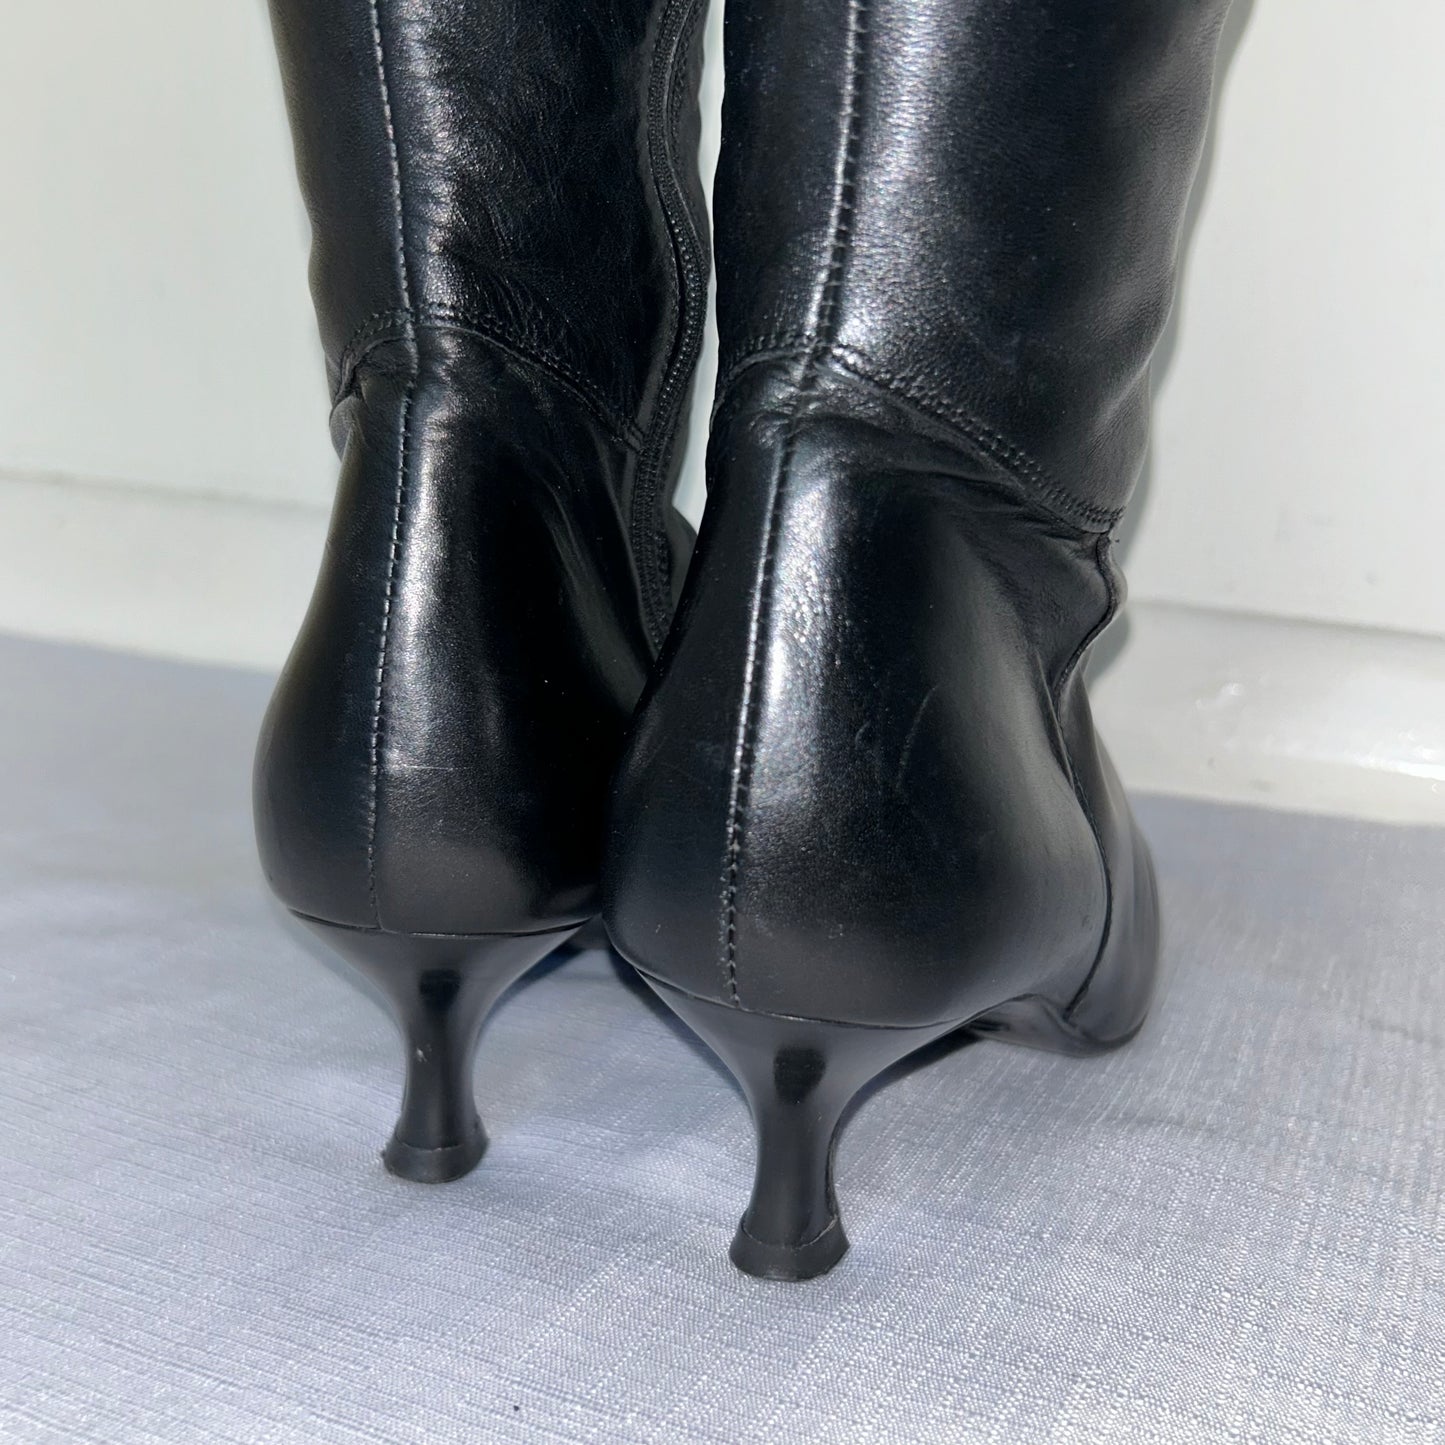 heels of black knee high kitten heel leather boots shown on a white background